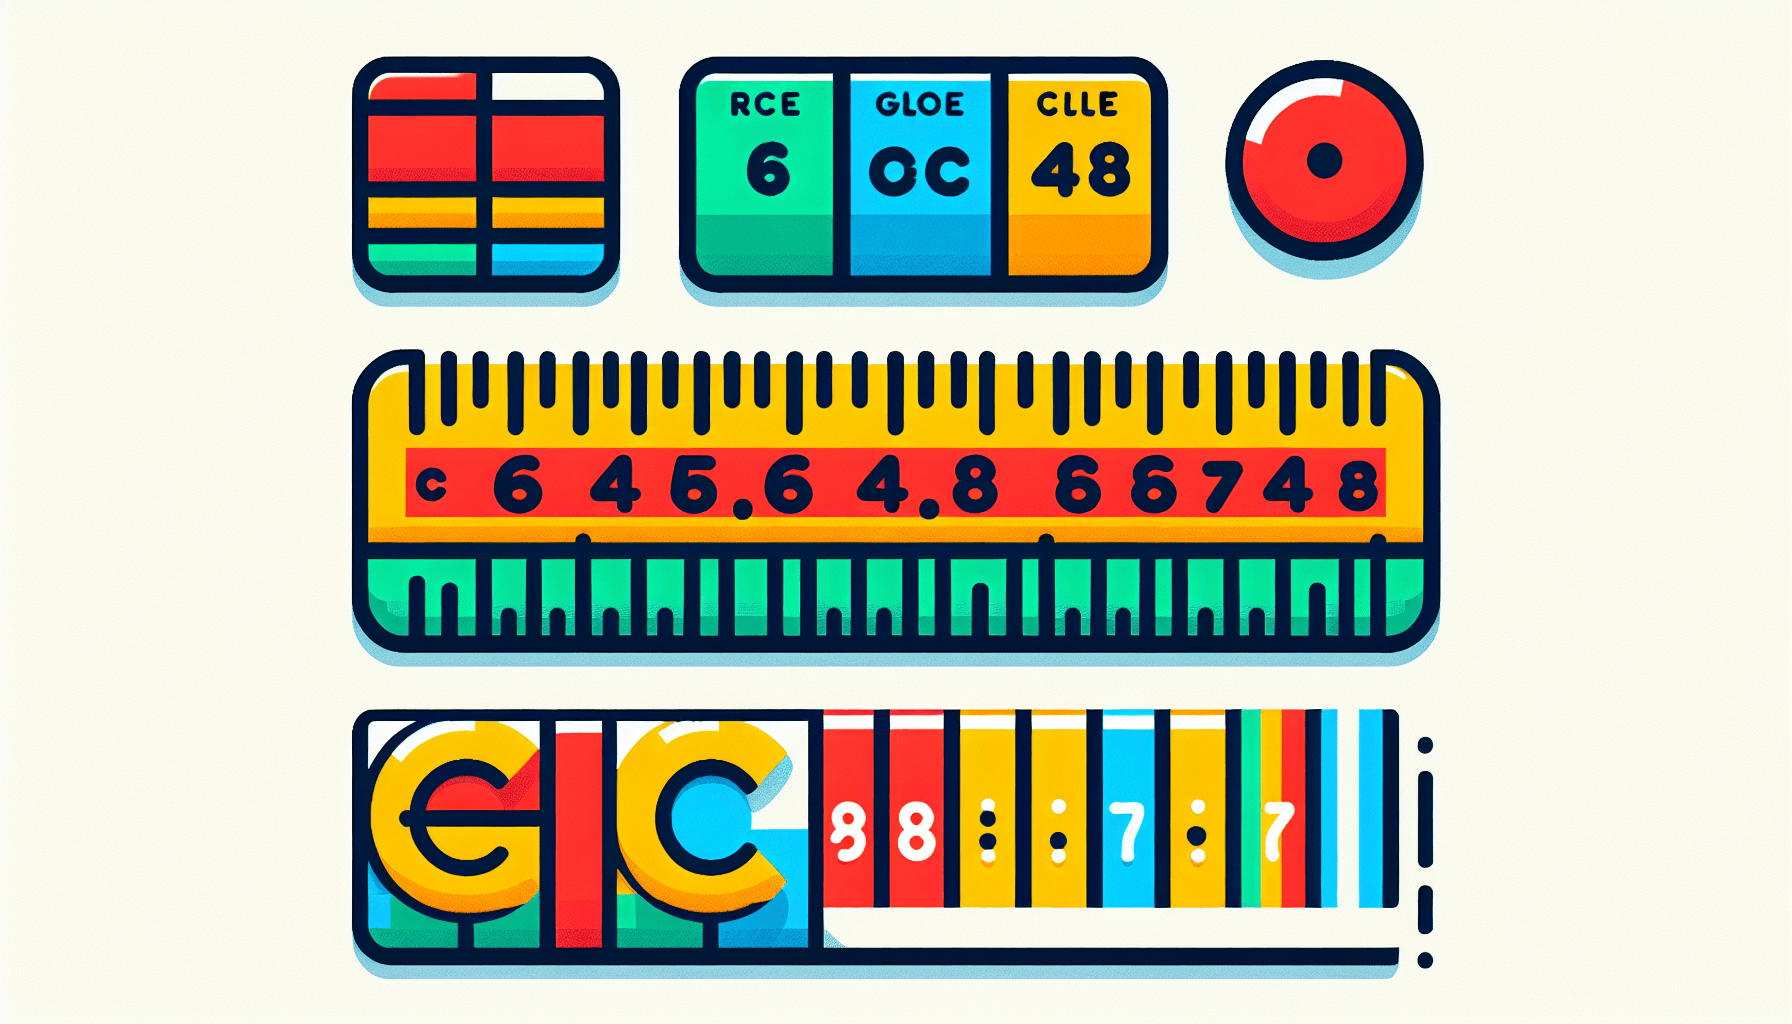 Ruler in flat illustration style and white background, red #f47574, green #88c7a8, yellow #fcc44b, and blue #645bc8 colors.